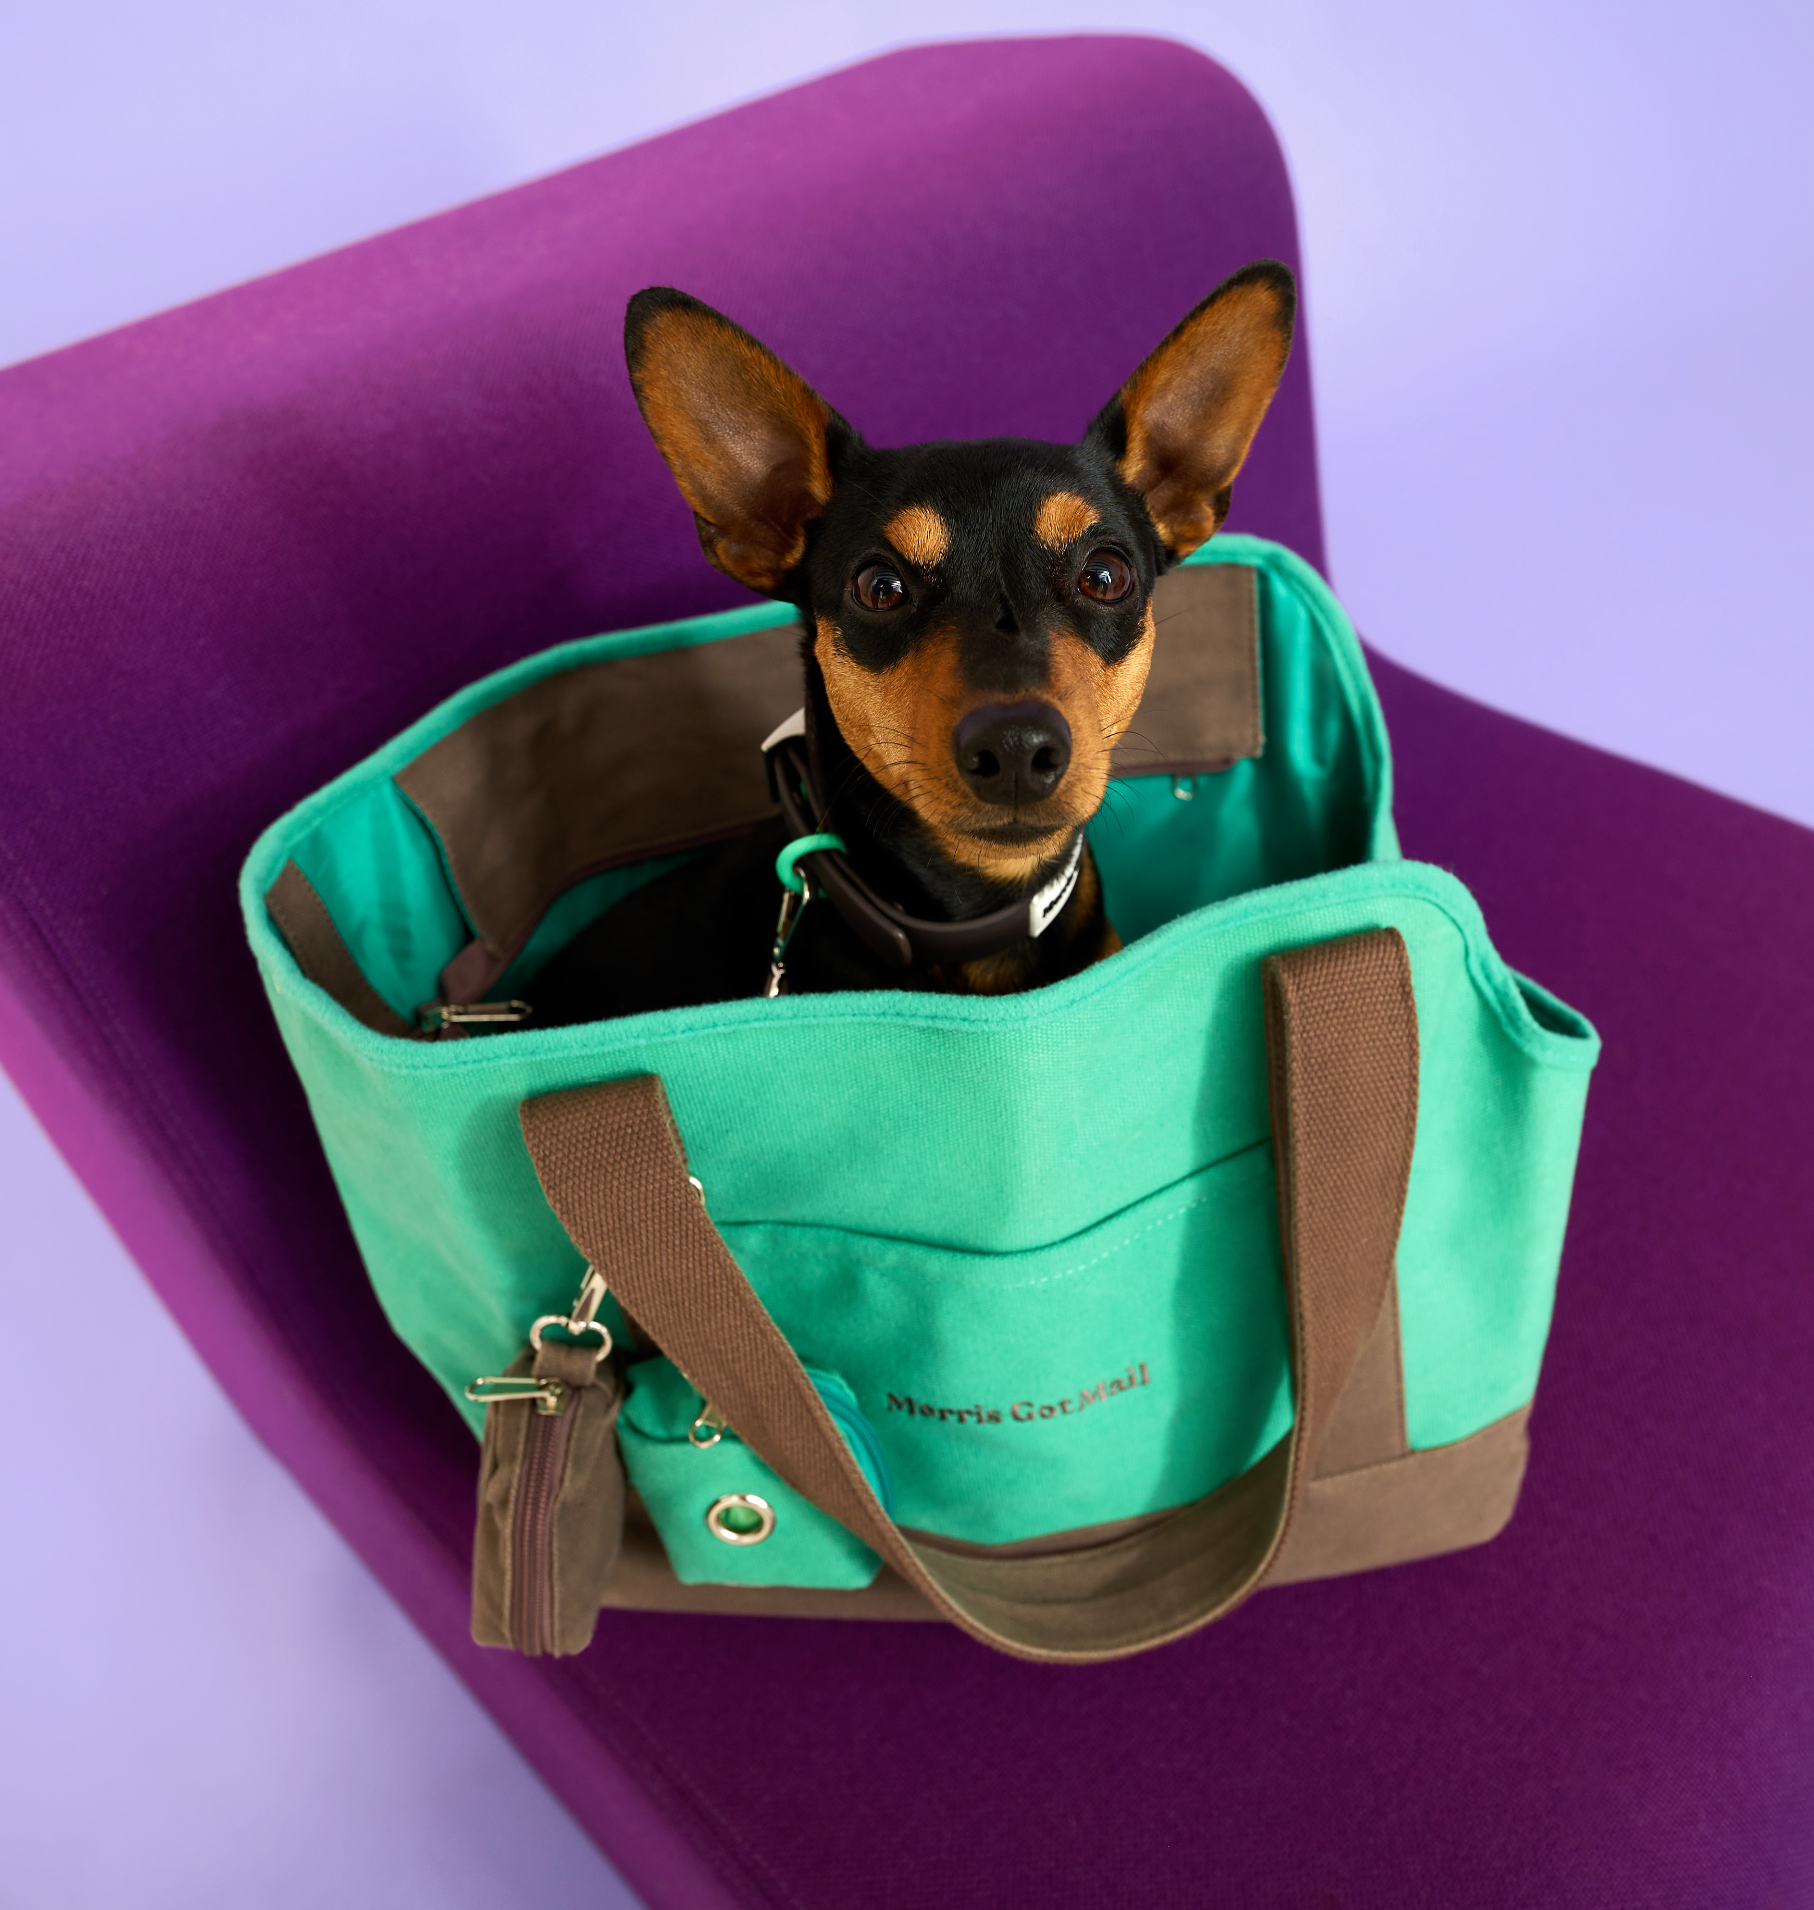 Explore benefits of firm-base carriers for dog comfort during travels. Choose 'Places to Go' tote—durable, safe, comfy, and stylish.